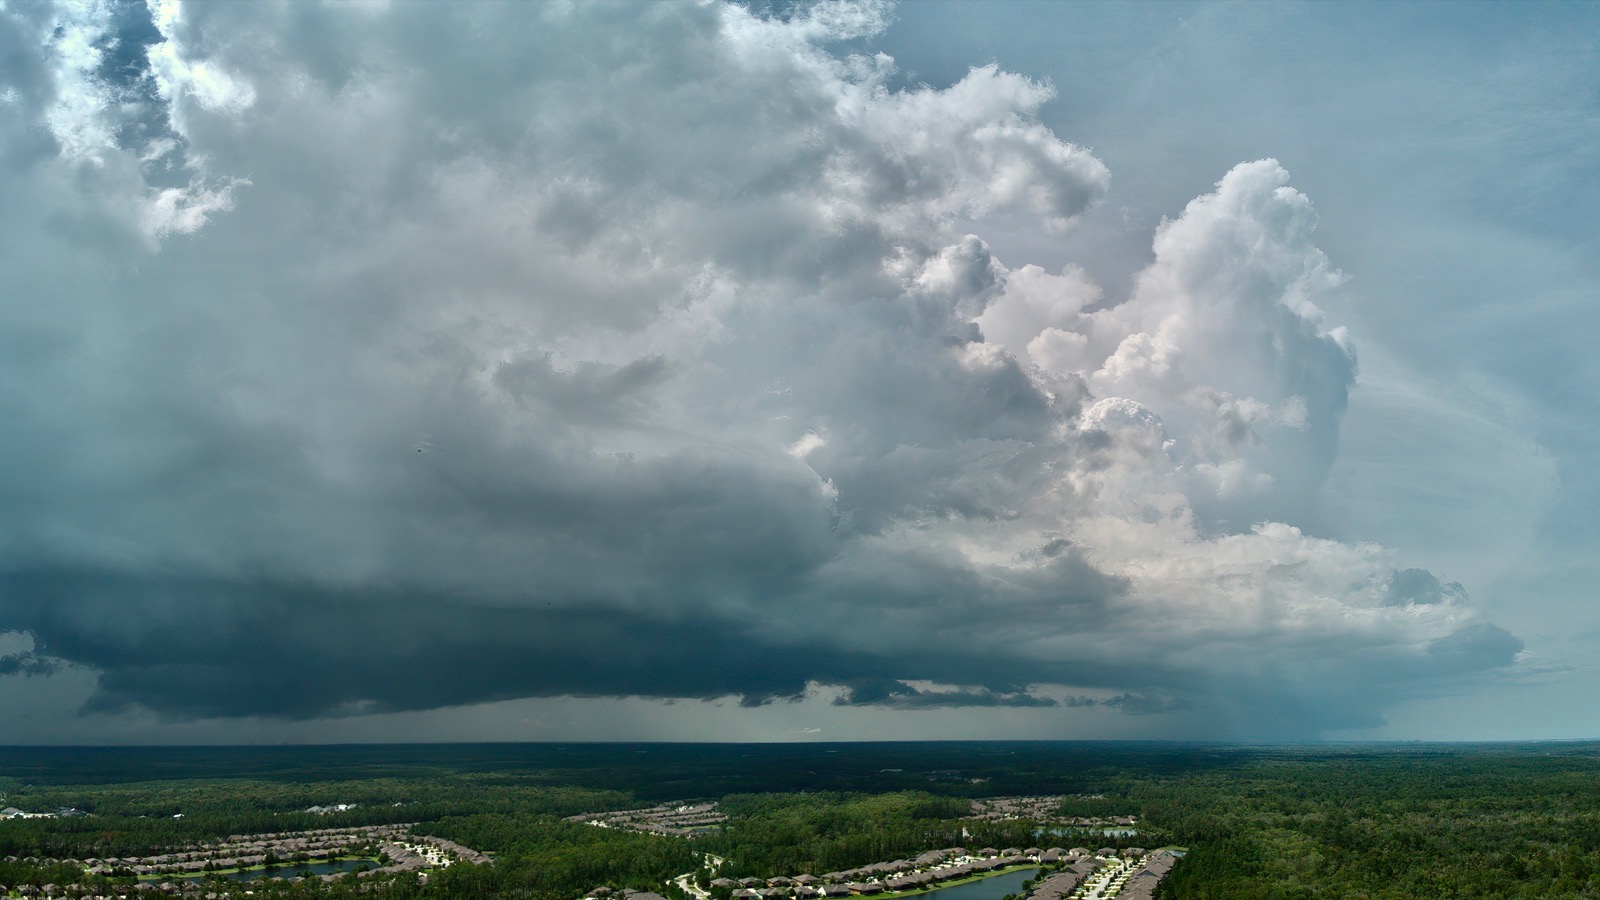 Aerial view of a large thunderhead over a suburban landscape